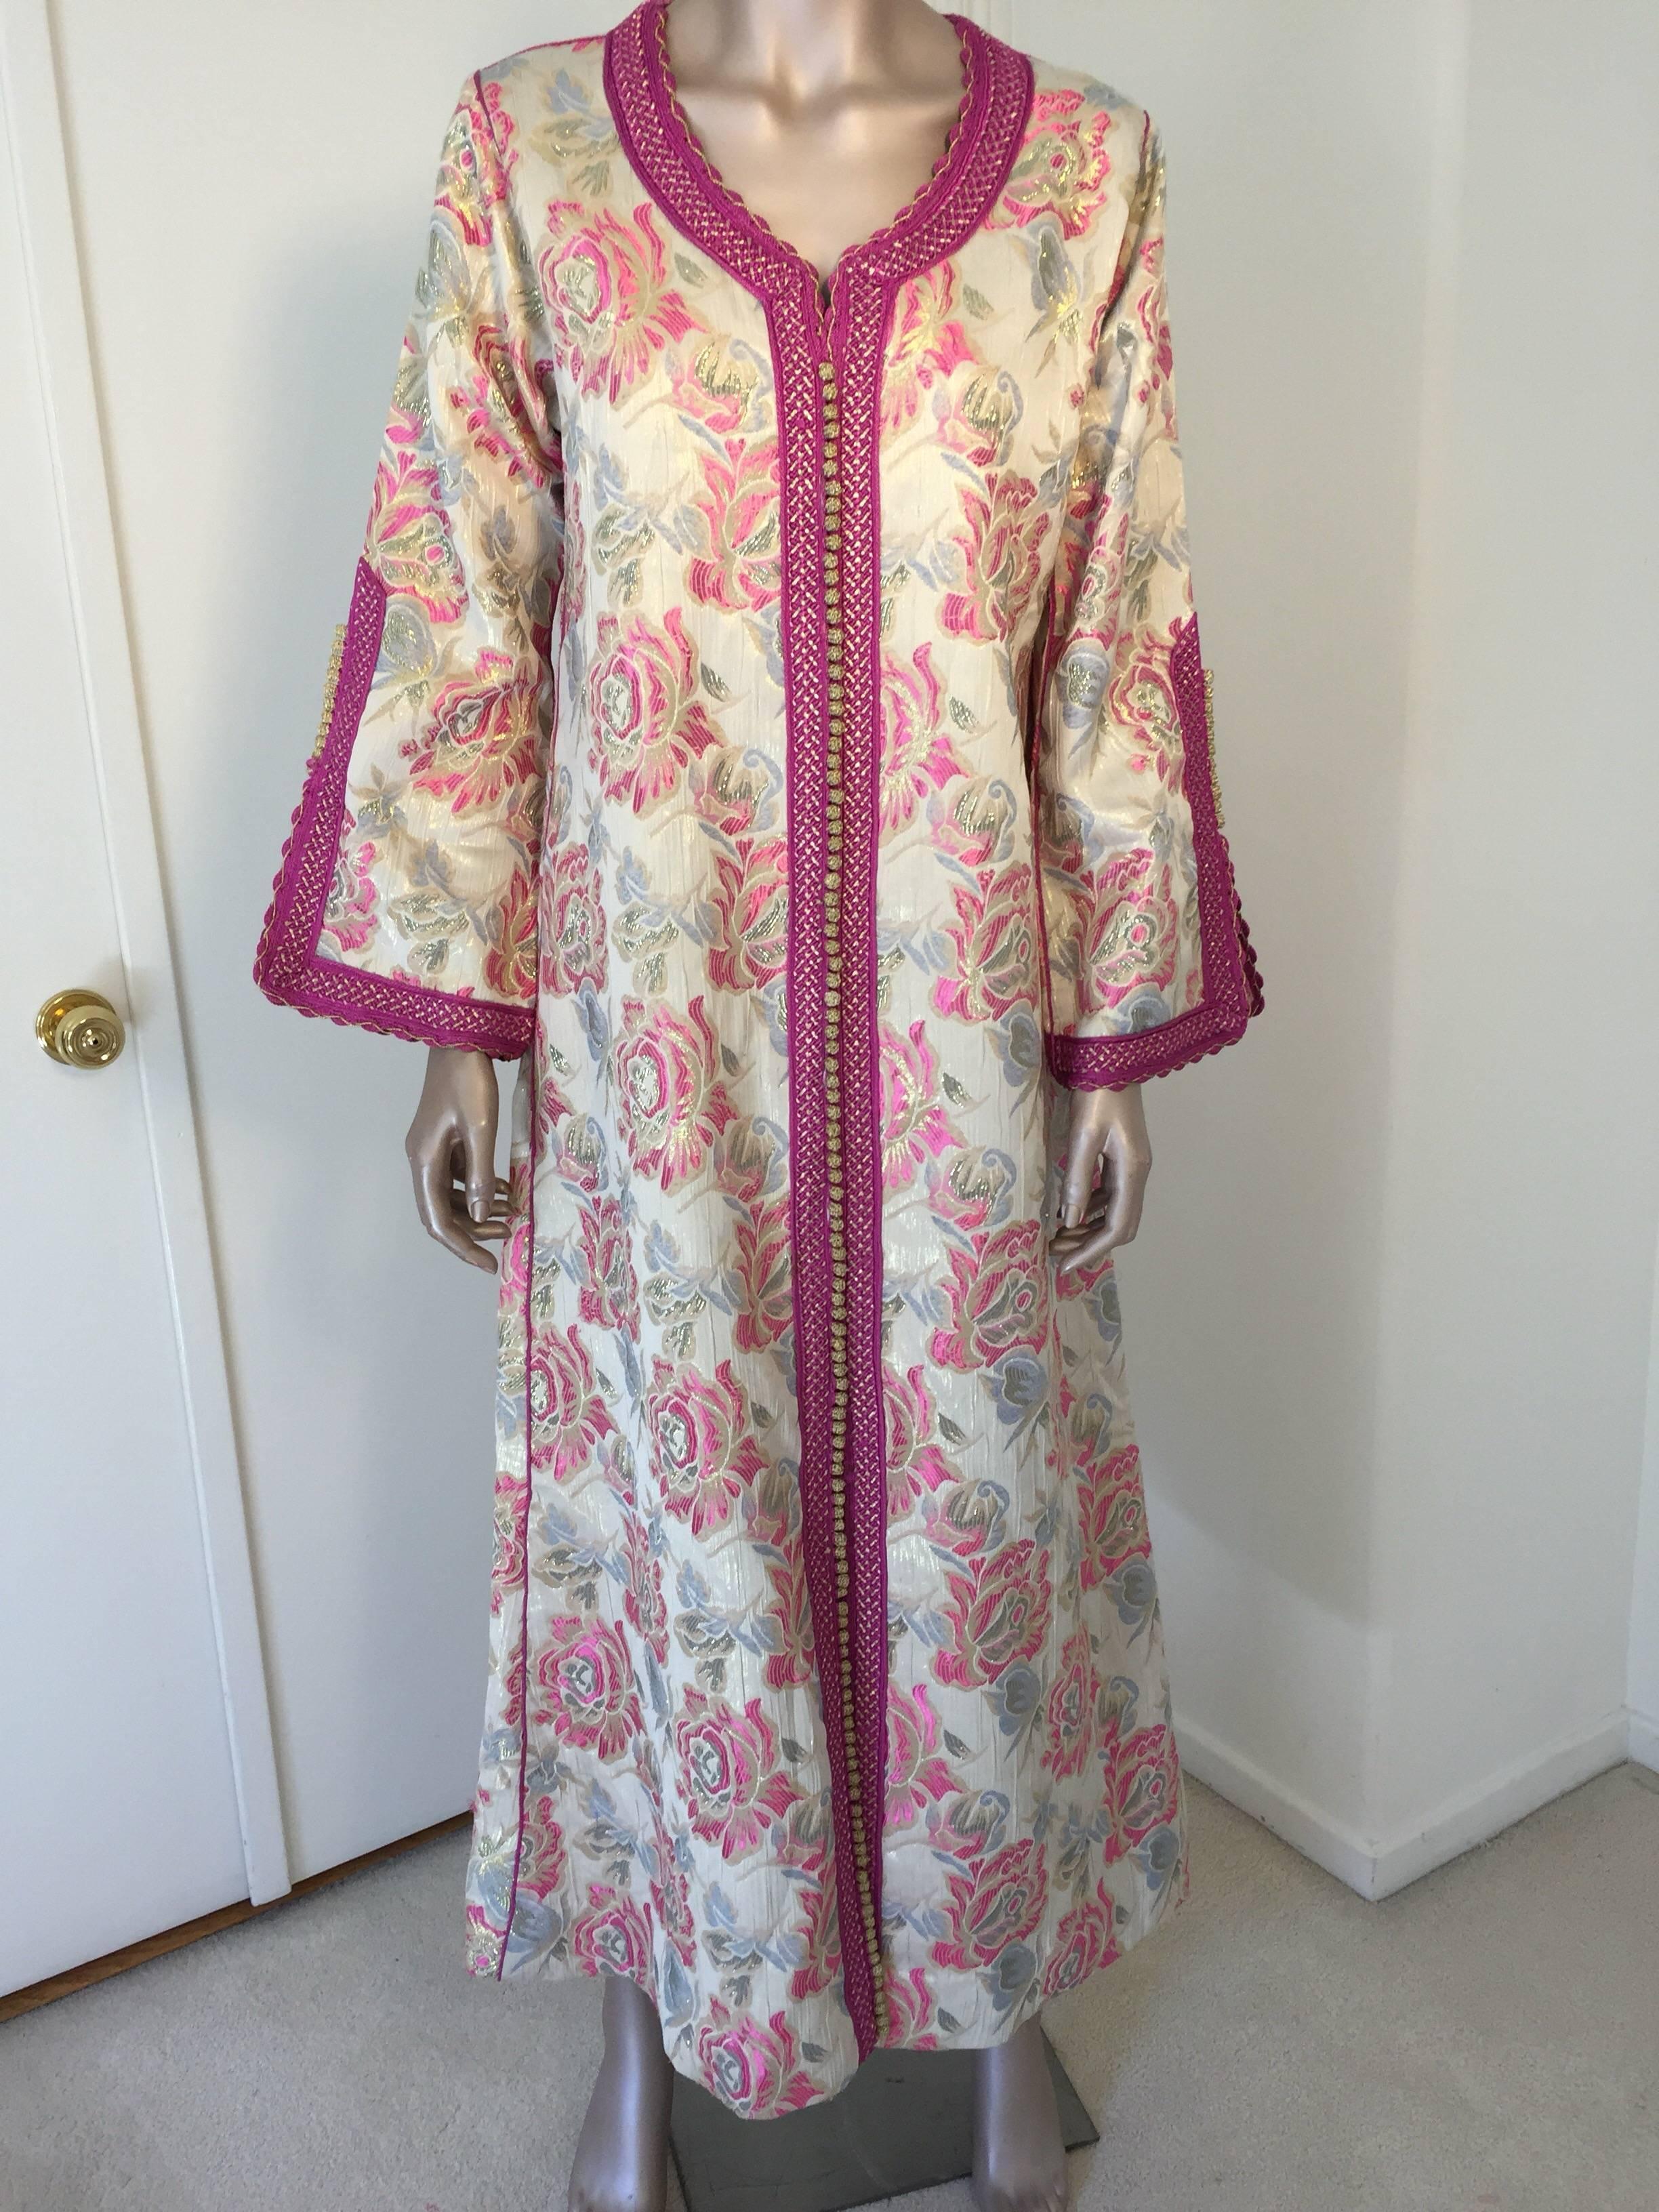 Elegant vintage designer Moroccan caftan, floral brocade embroidered with hot pink and gold trim.
This chic Bohemian maxi dress kaftan is embroidered and embellished with gold and pink thread metallic trim. 
One of a kind evening Moroccan Middle